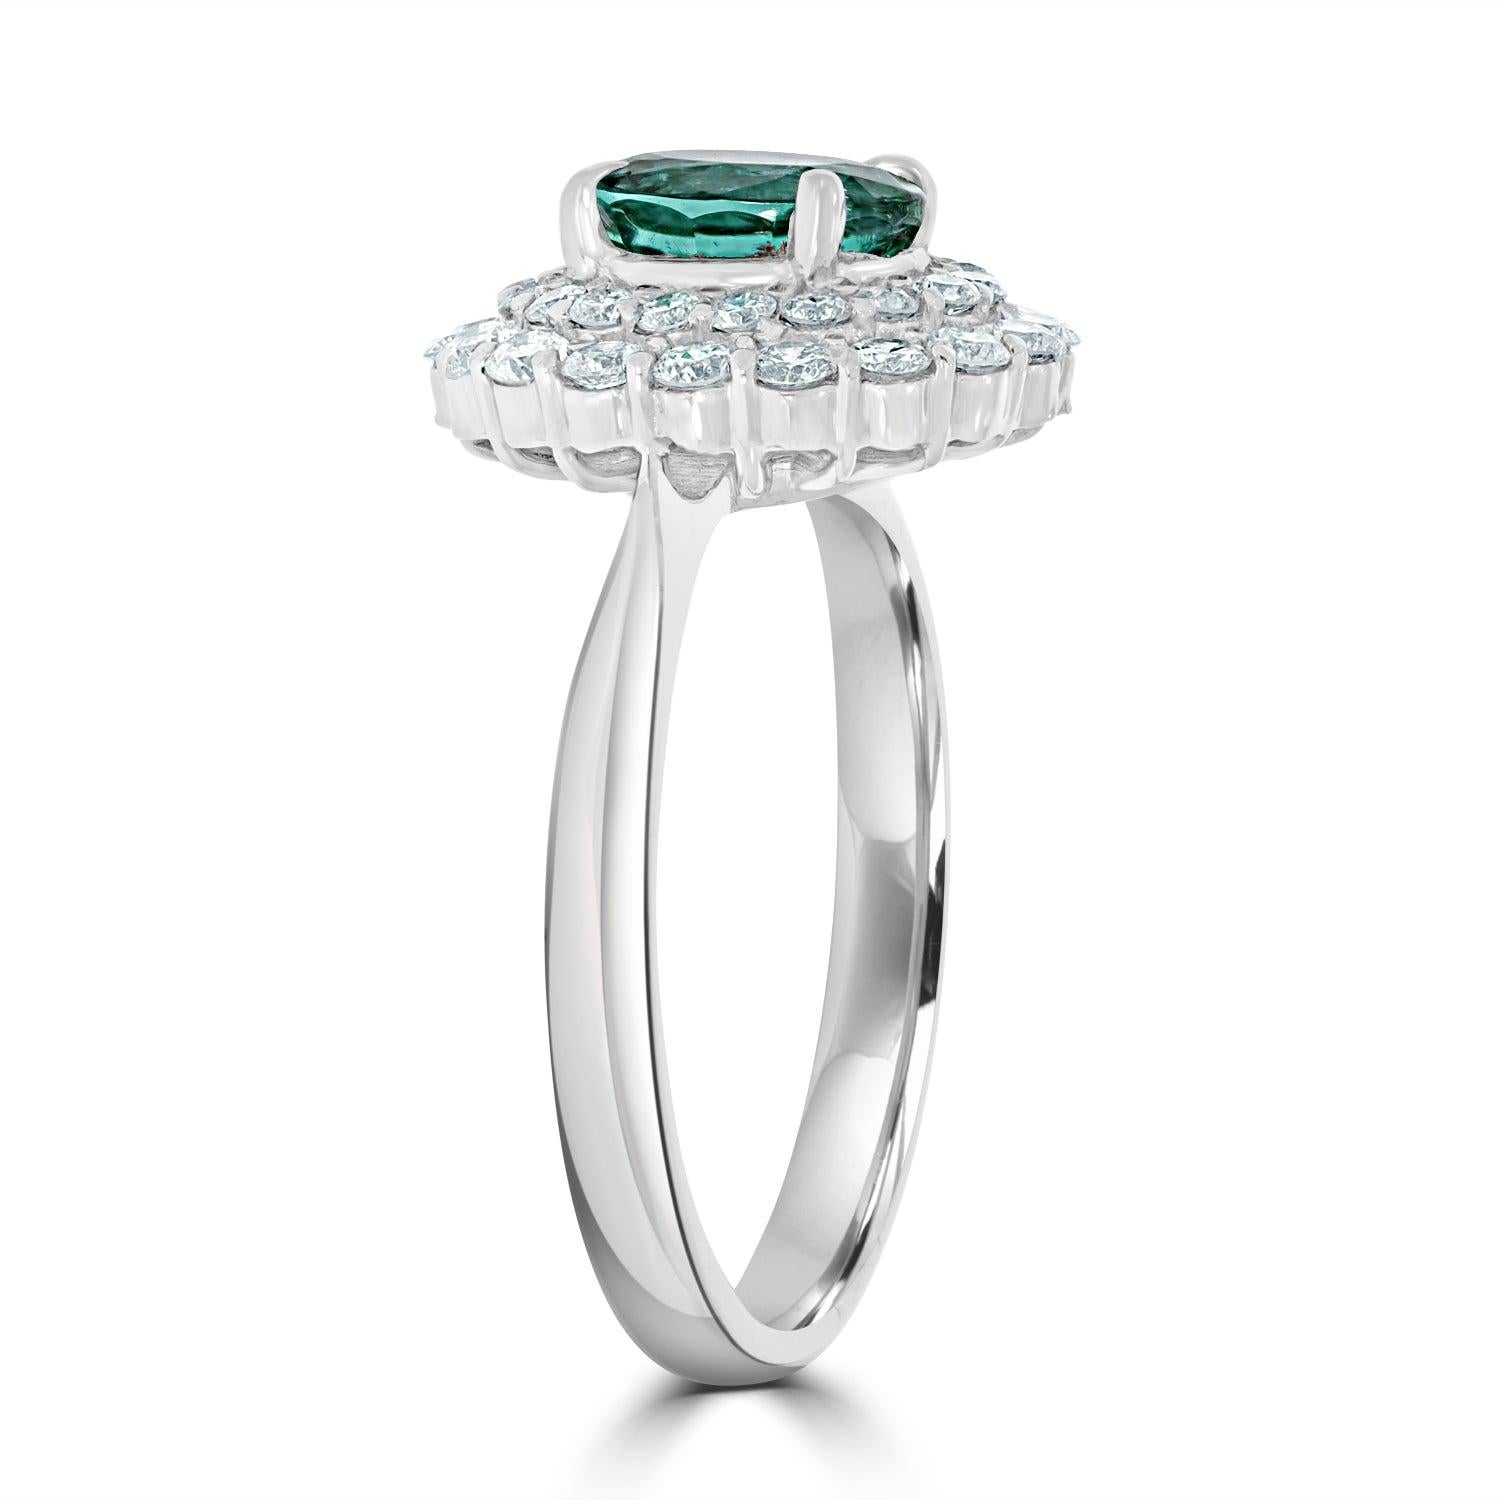 Oval Cut GIA Certified 1.07ct Brazilian Paraiba Tourmaline and Diamonds in Platinum Ring For Sale